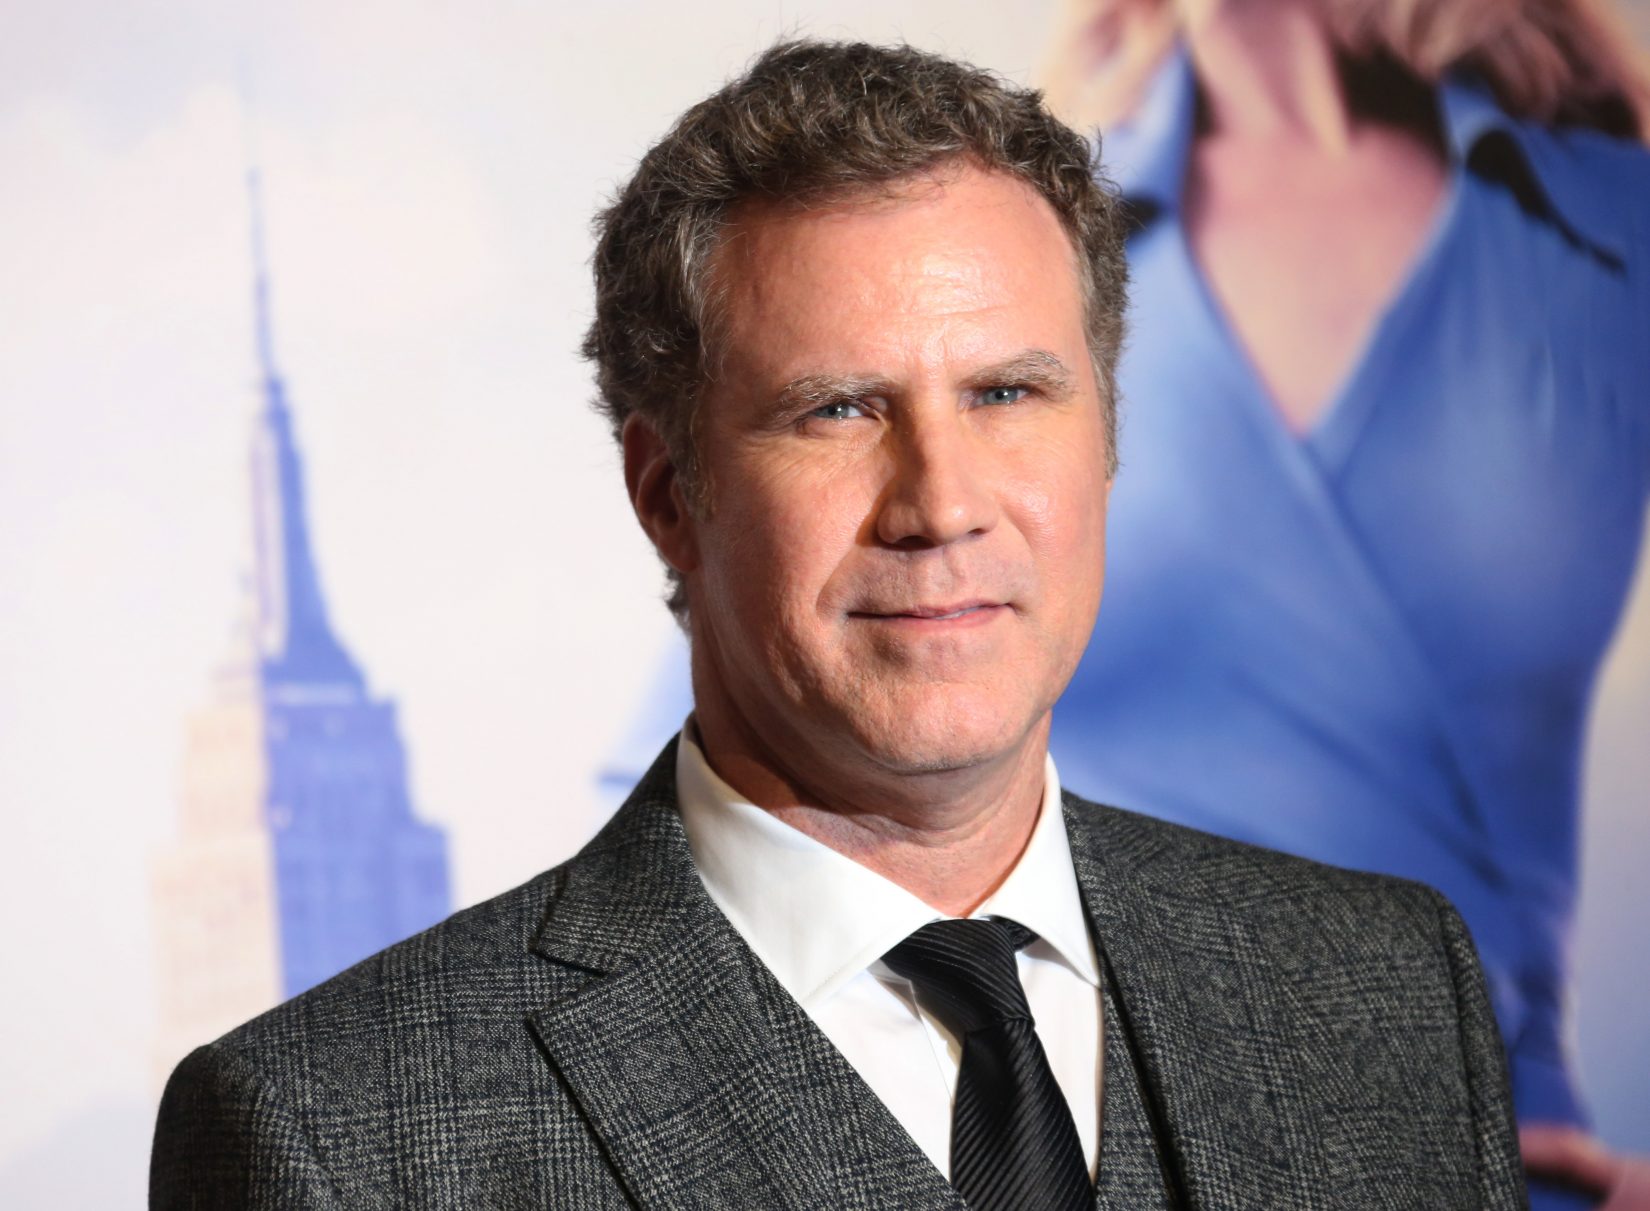 Will Ferrell is ready to rock the cowbell and "climb trees" with Snoop Dogg.